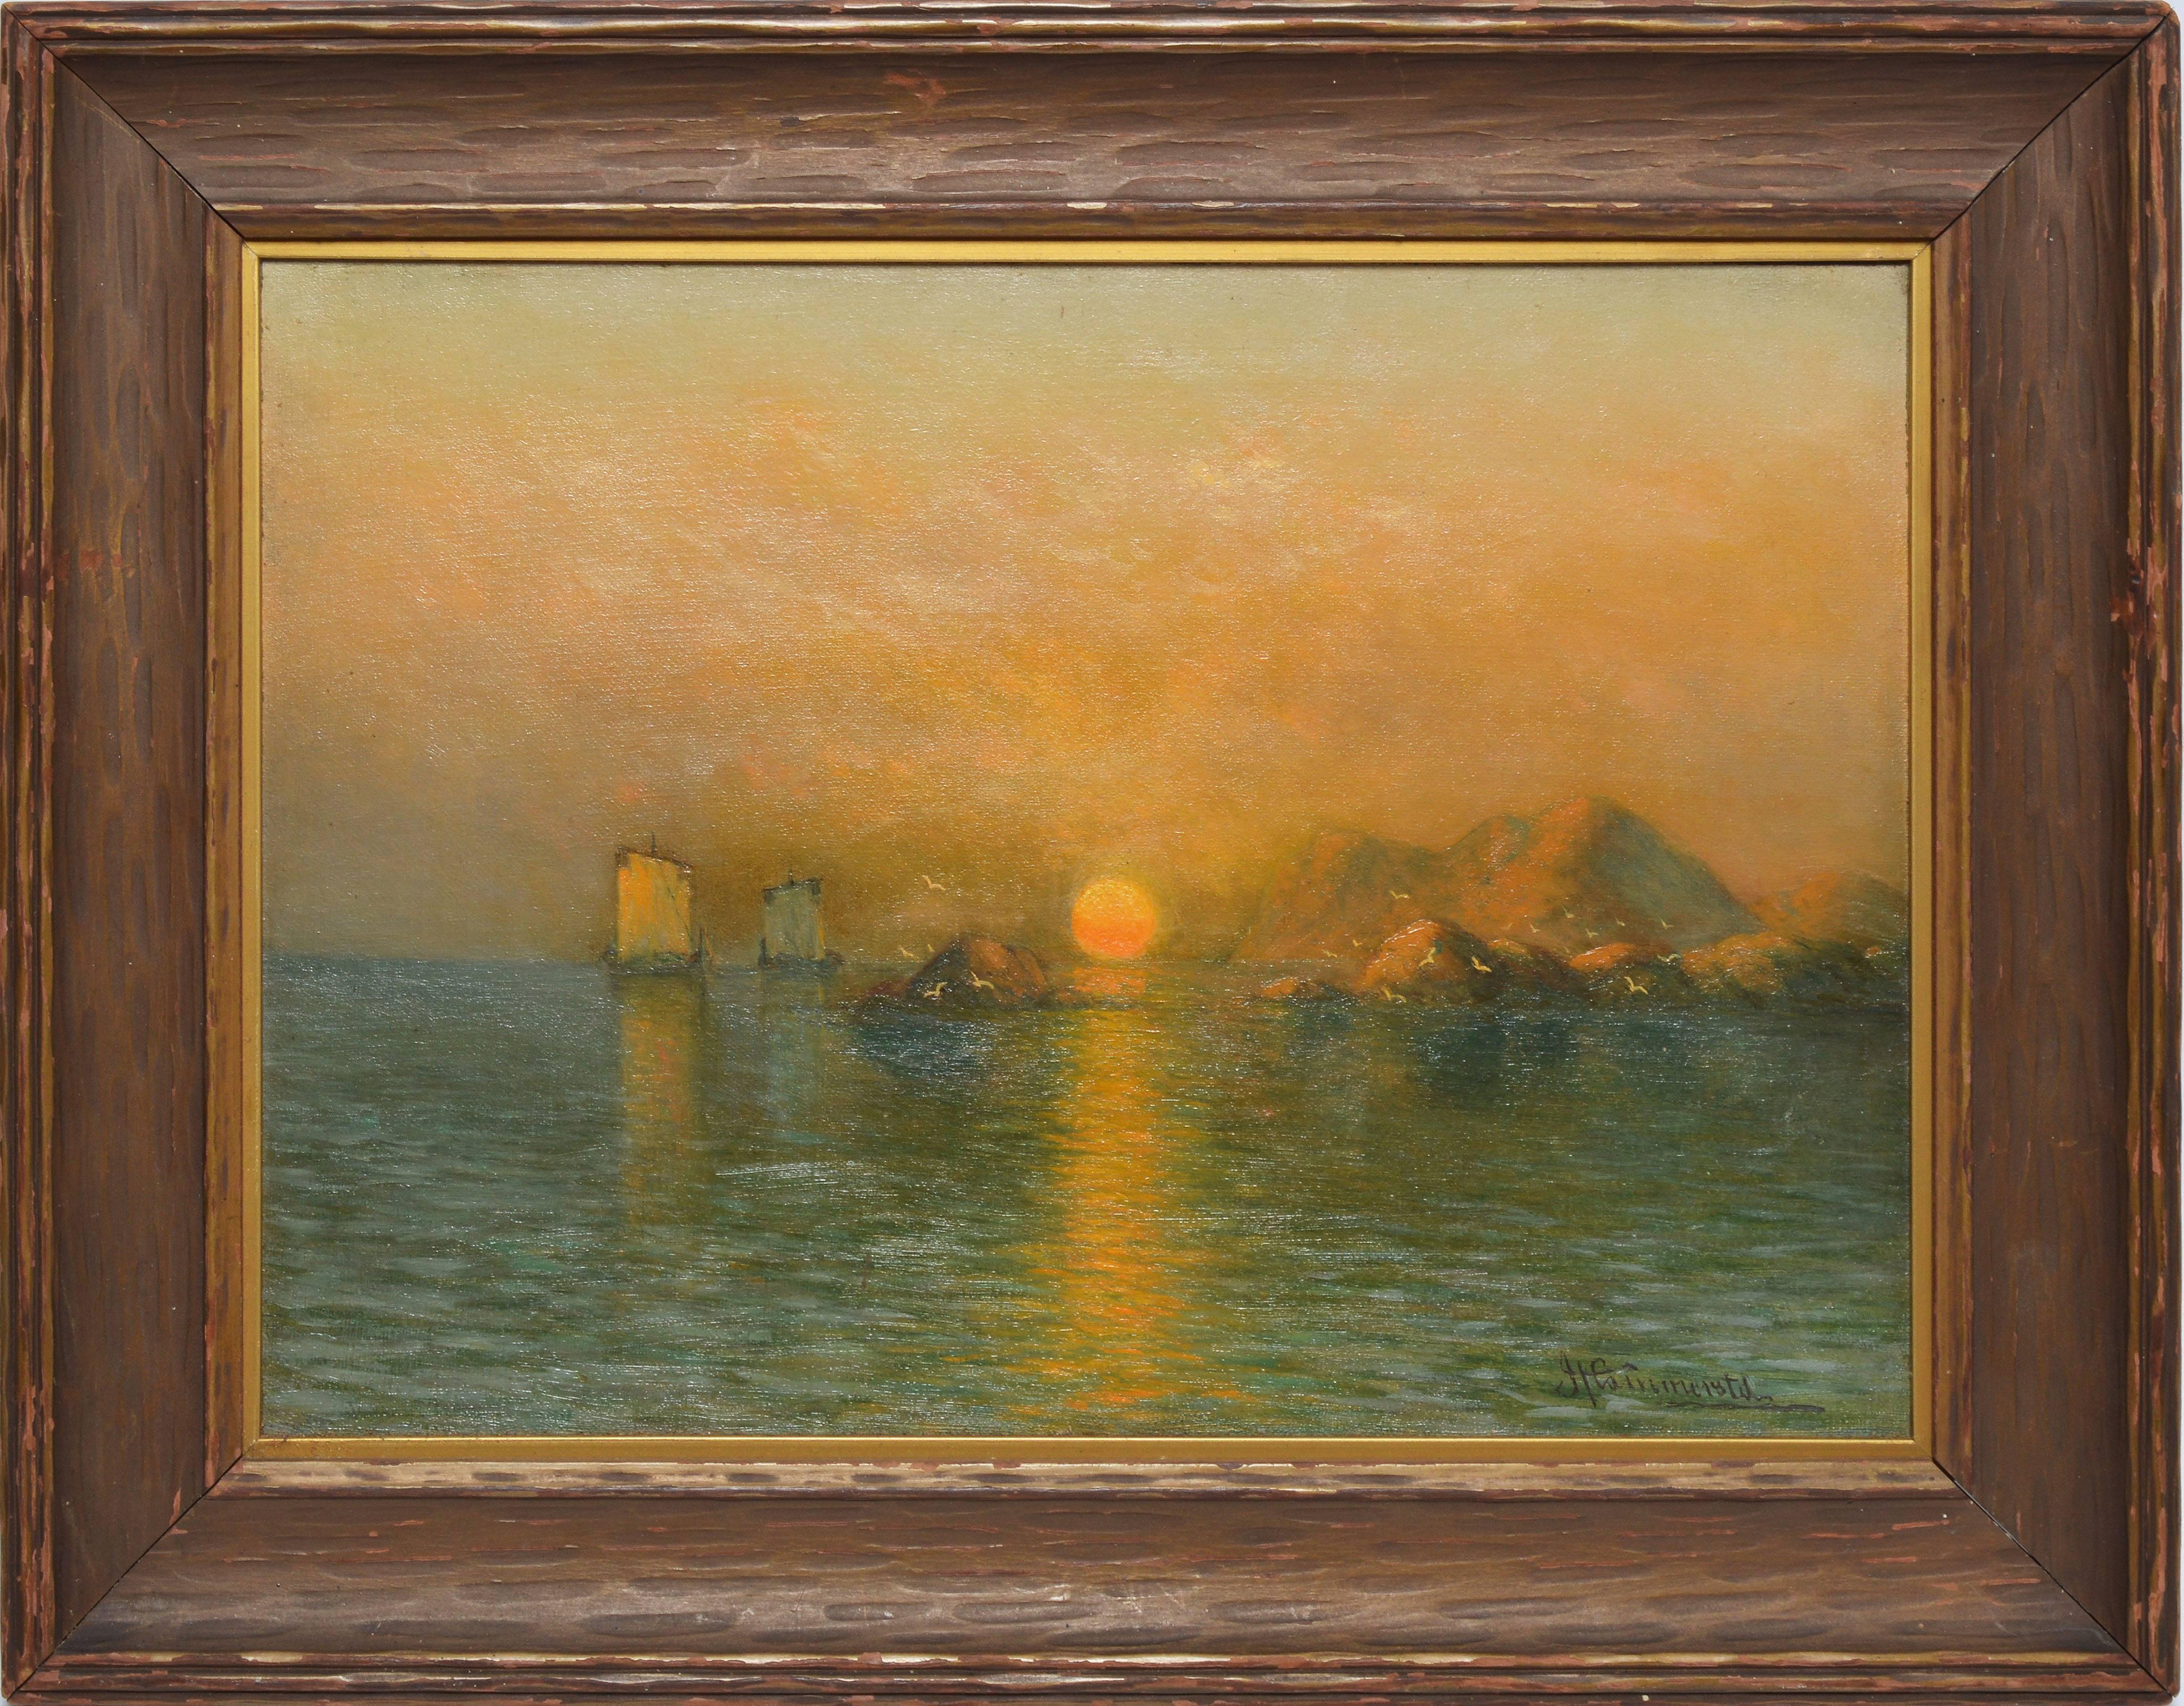 Impressionist seascape with sailboats at sunset by John Hammerstad  (1842 - 1925).  Oil on canvas, circa 1890.  Signed lower right.  Displayed in a wood frame.  Image size, 14"L x 10"H, overall 18"L x 14"H.